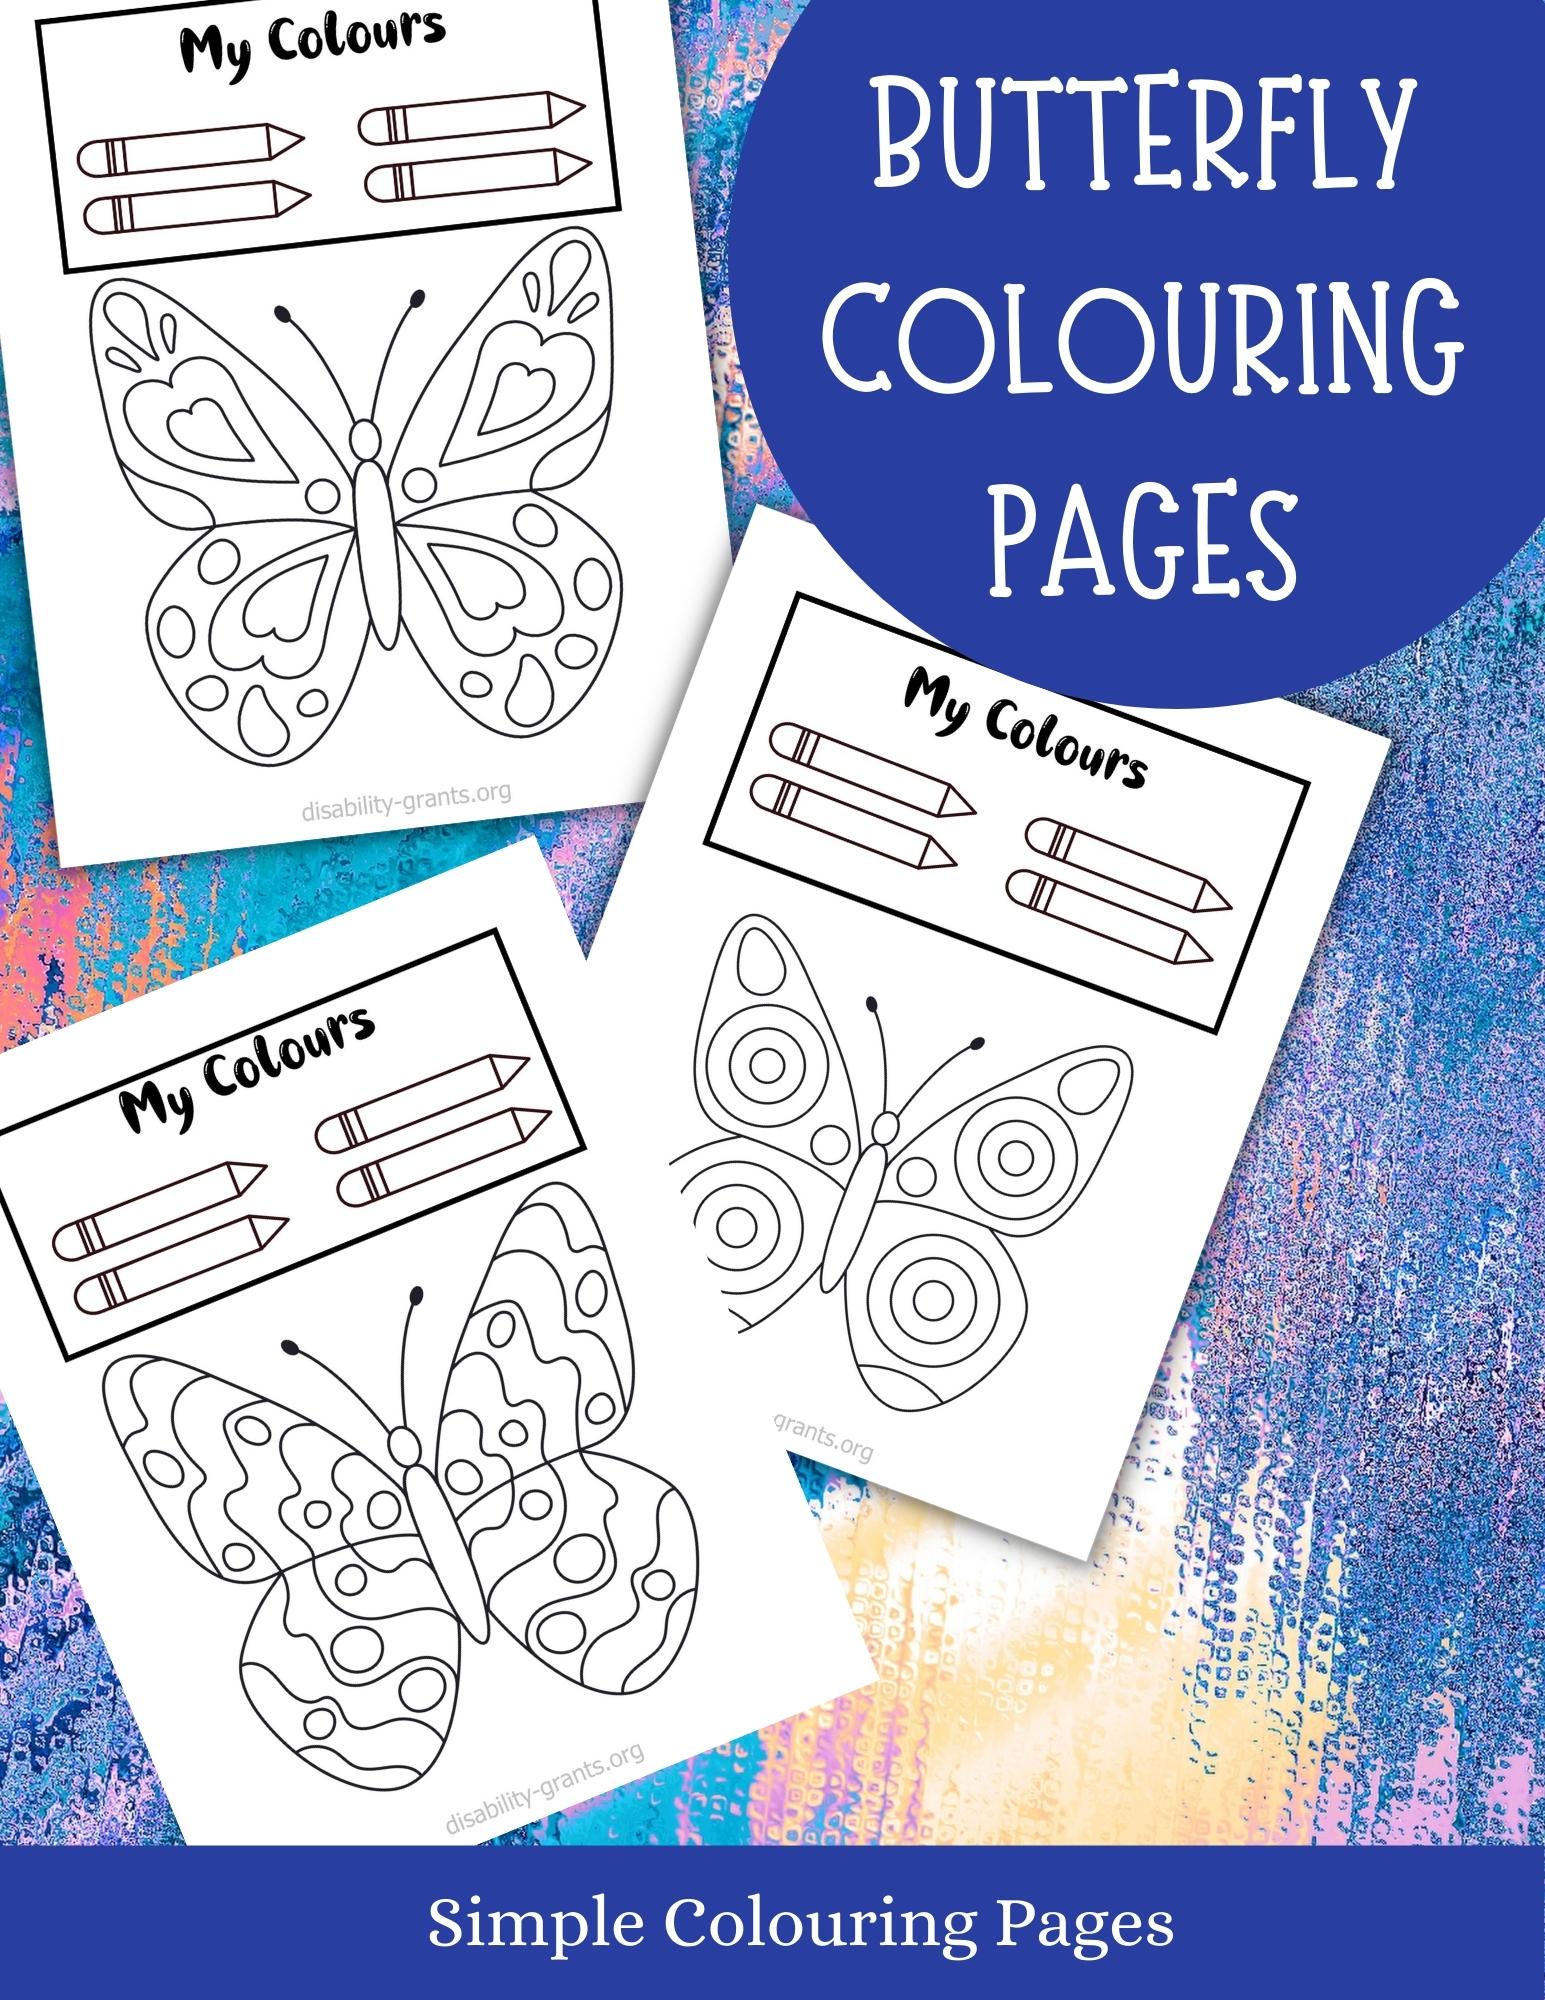 A colouring book for adults with Dementia, Alzheimers and Learning Difficulties featuring butterfly colouring pages.